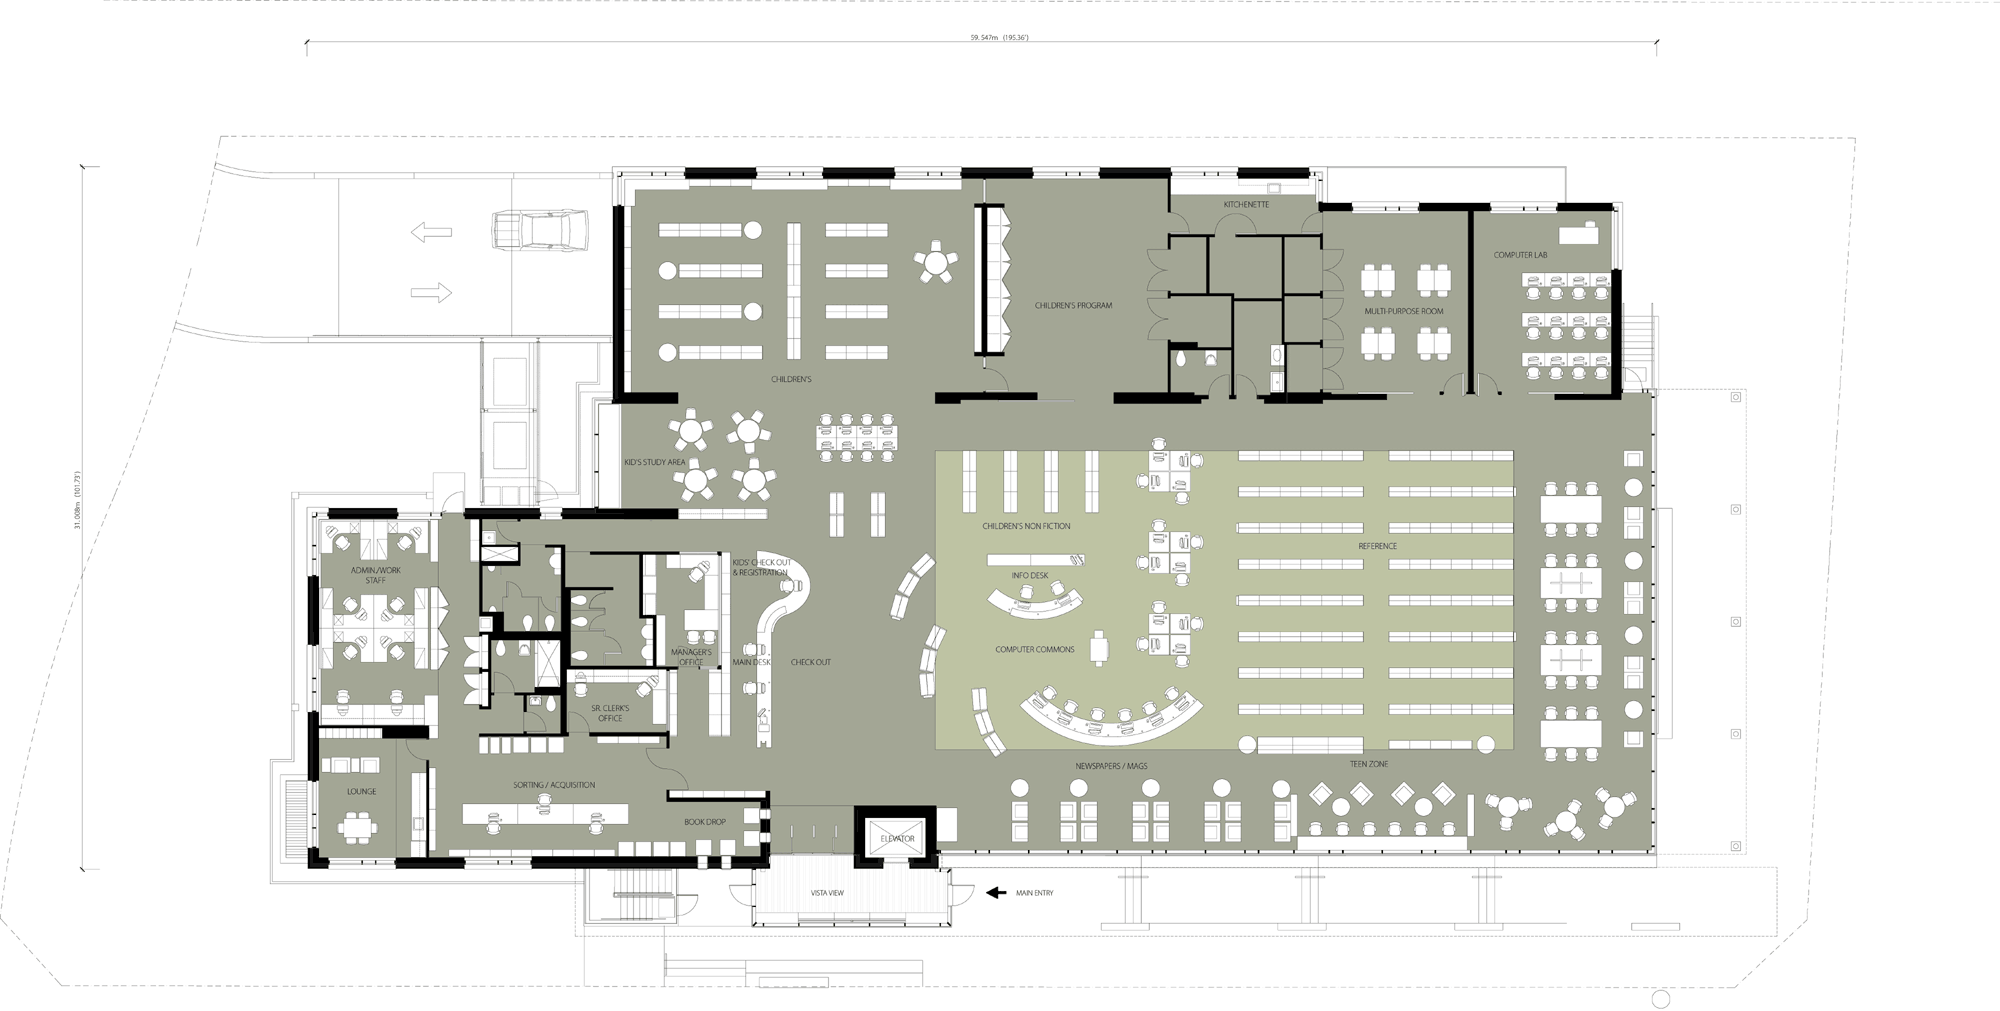 Library Floor Plans